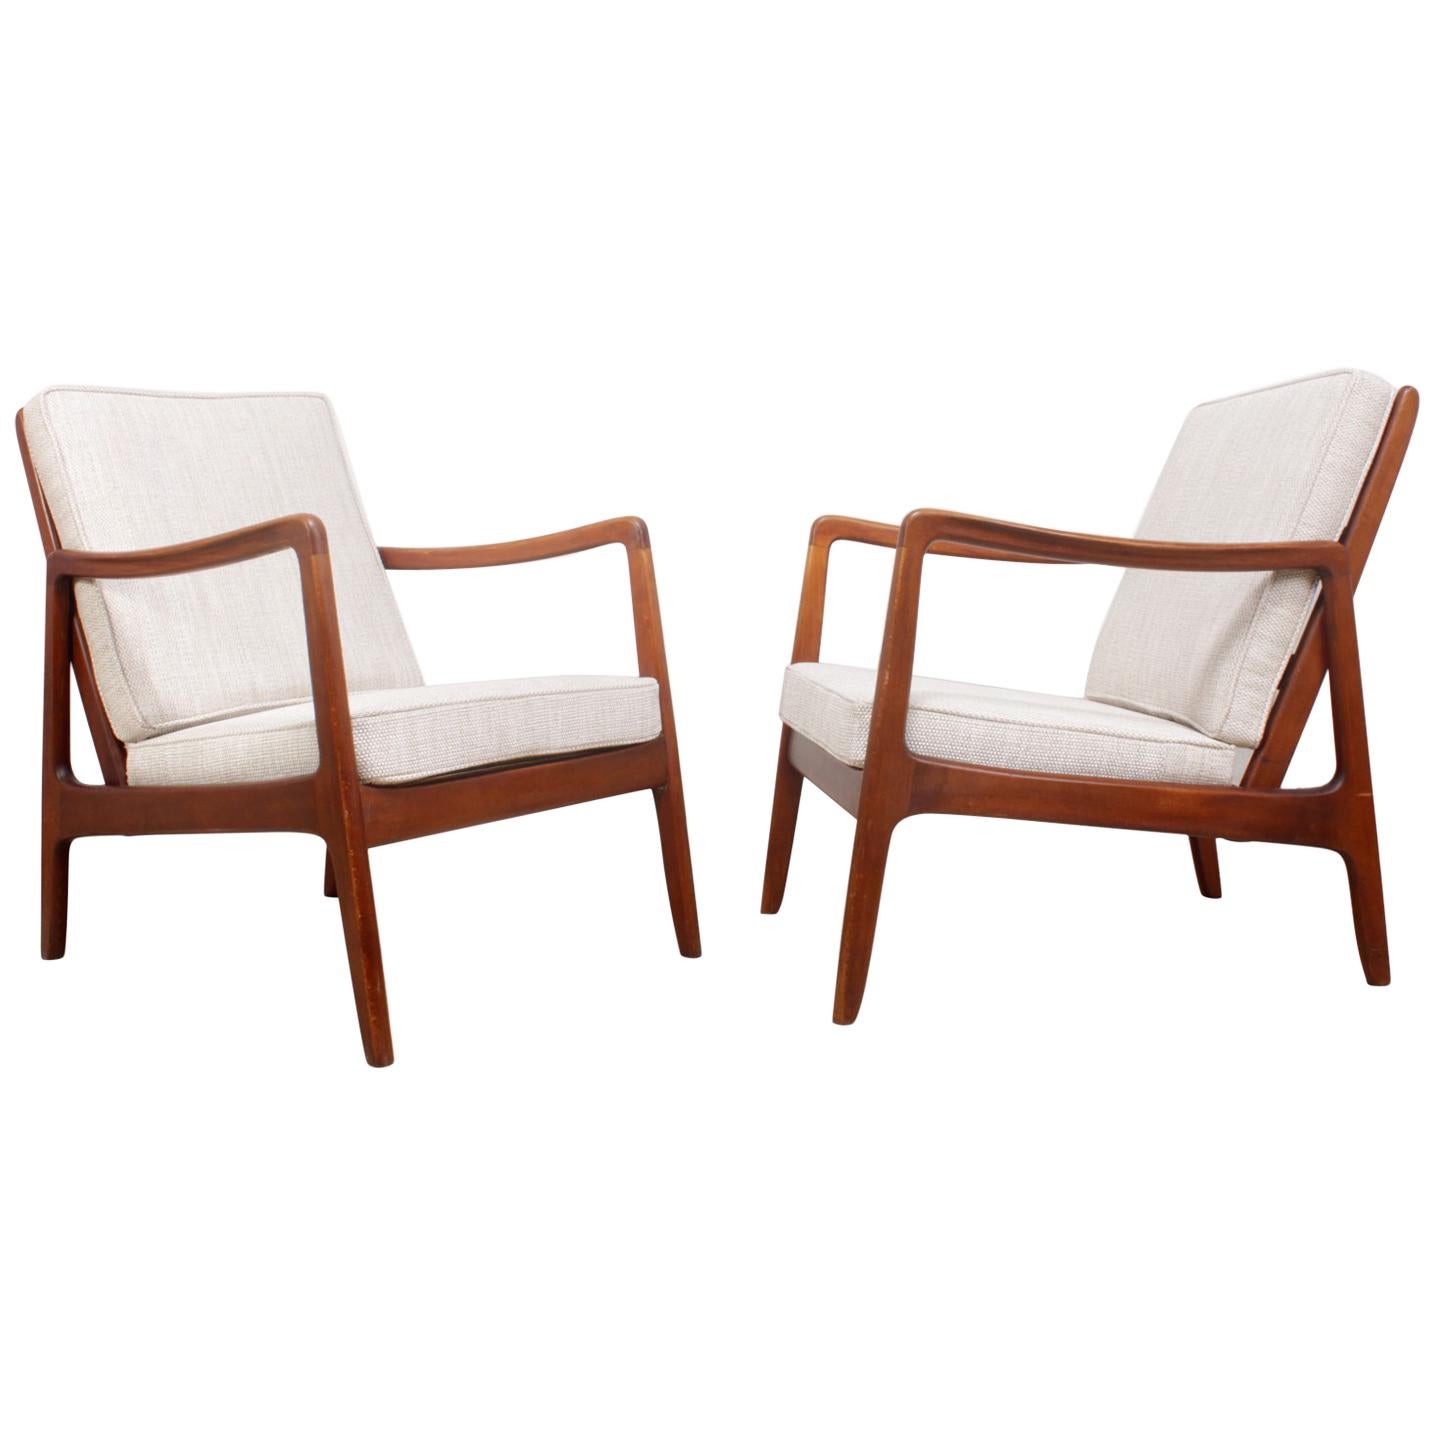 Pair of Armchairs by Ole Wancher for France and Son, circa 1950